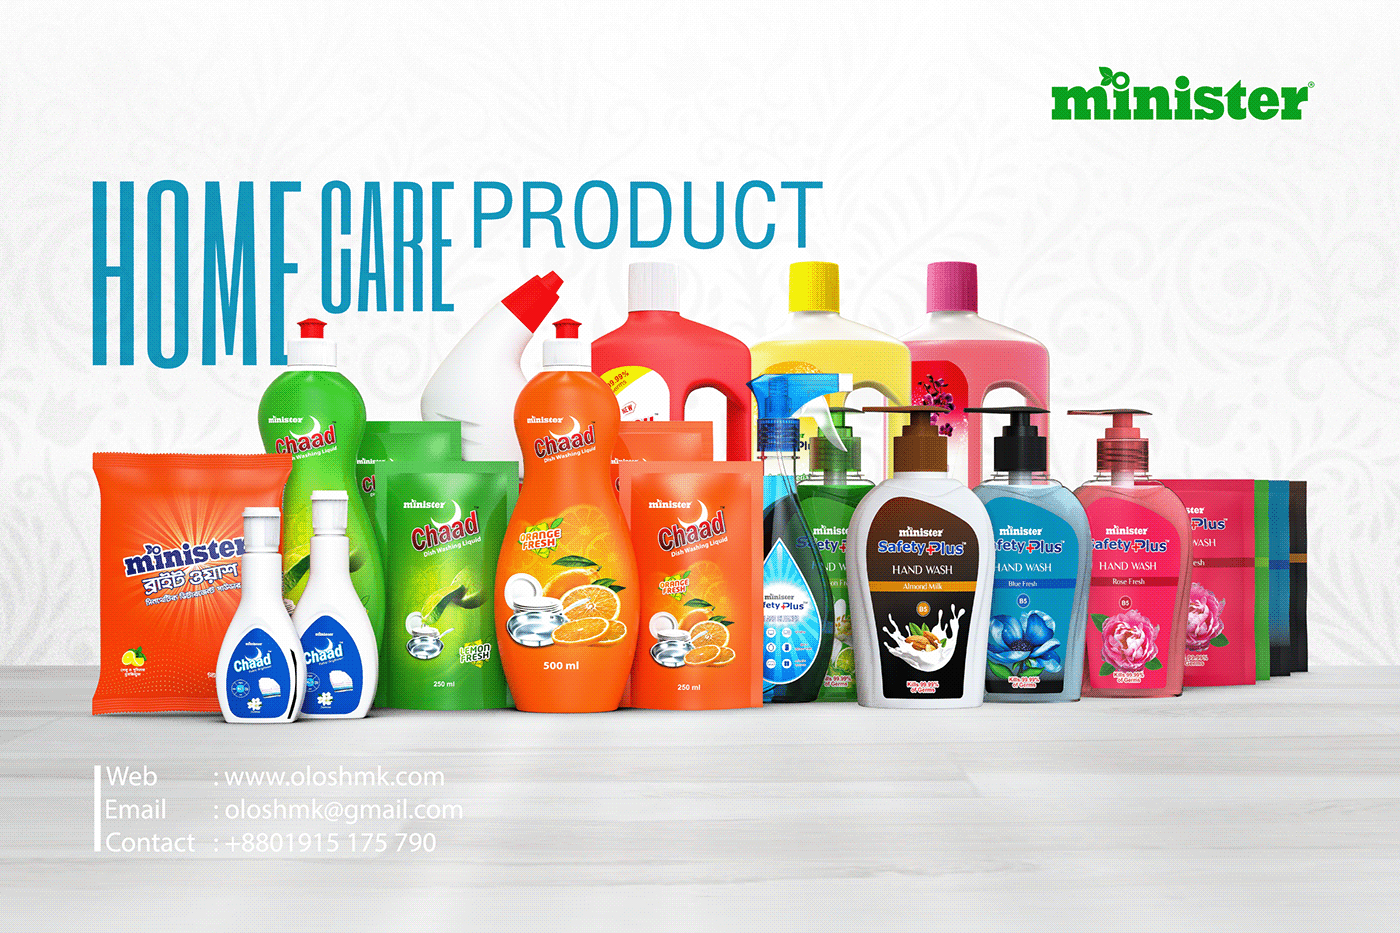 Bathroom Cleaner detergent dish wash fabric brightener floor cleaner glass cleaner hand wash Home Care home care product Liquid